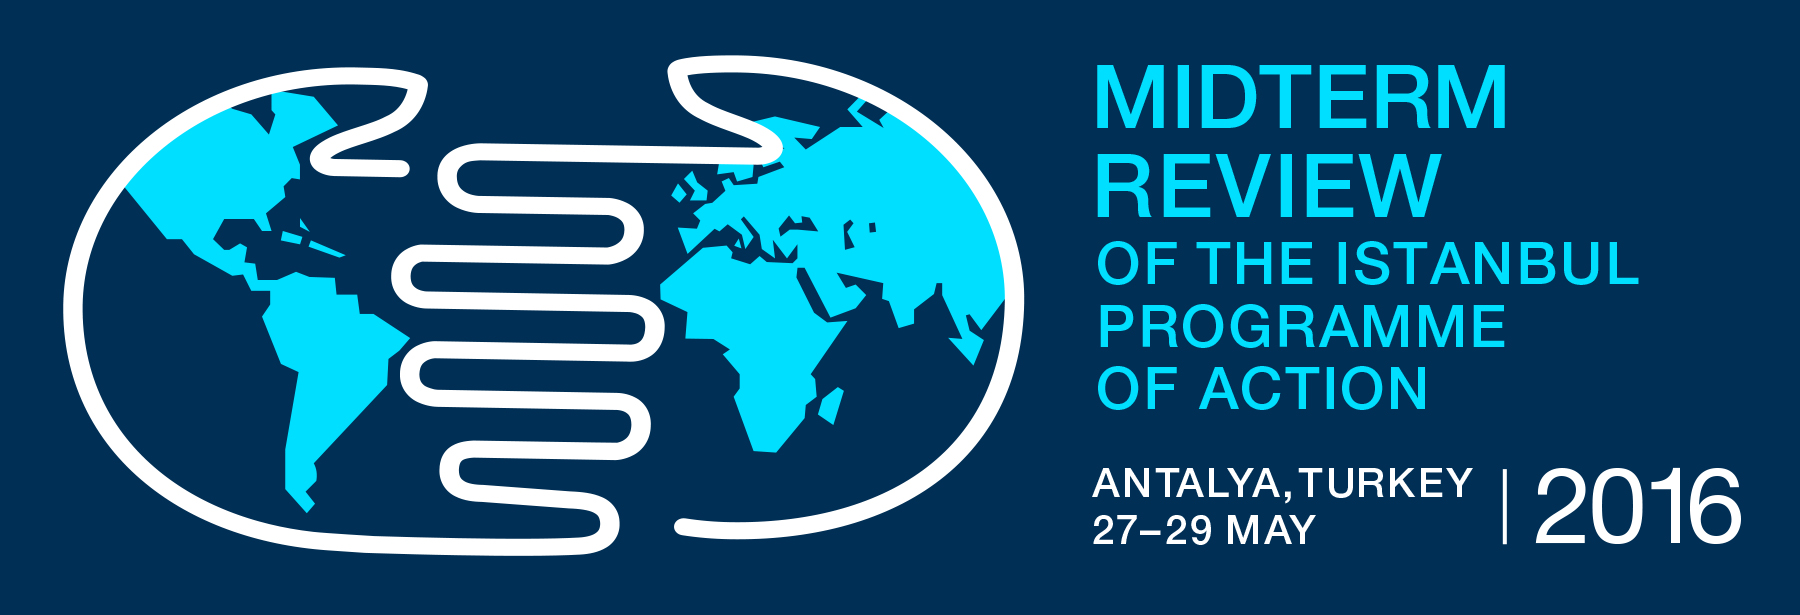 Midterm Review of the Istanbul Programme of Action for Least Developed Countries - Antalya, 27-29 May 2016